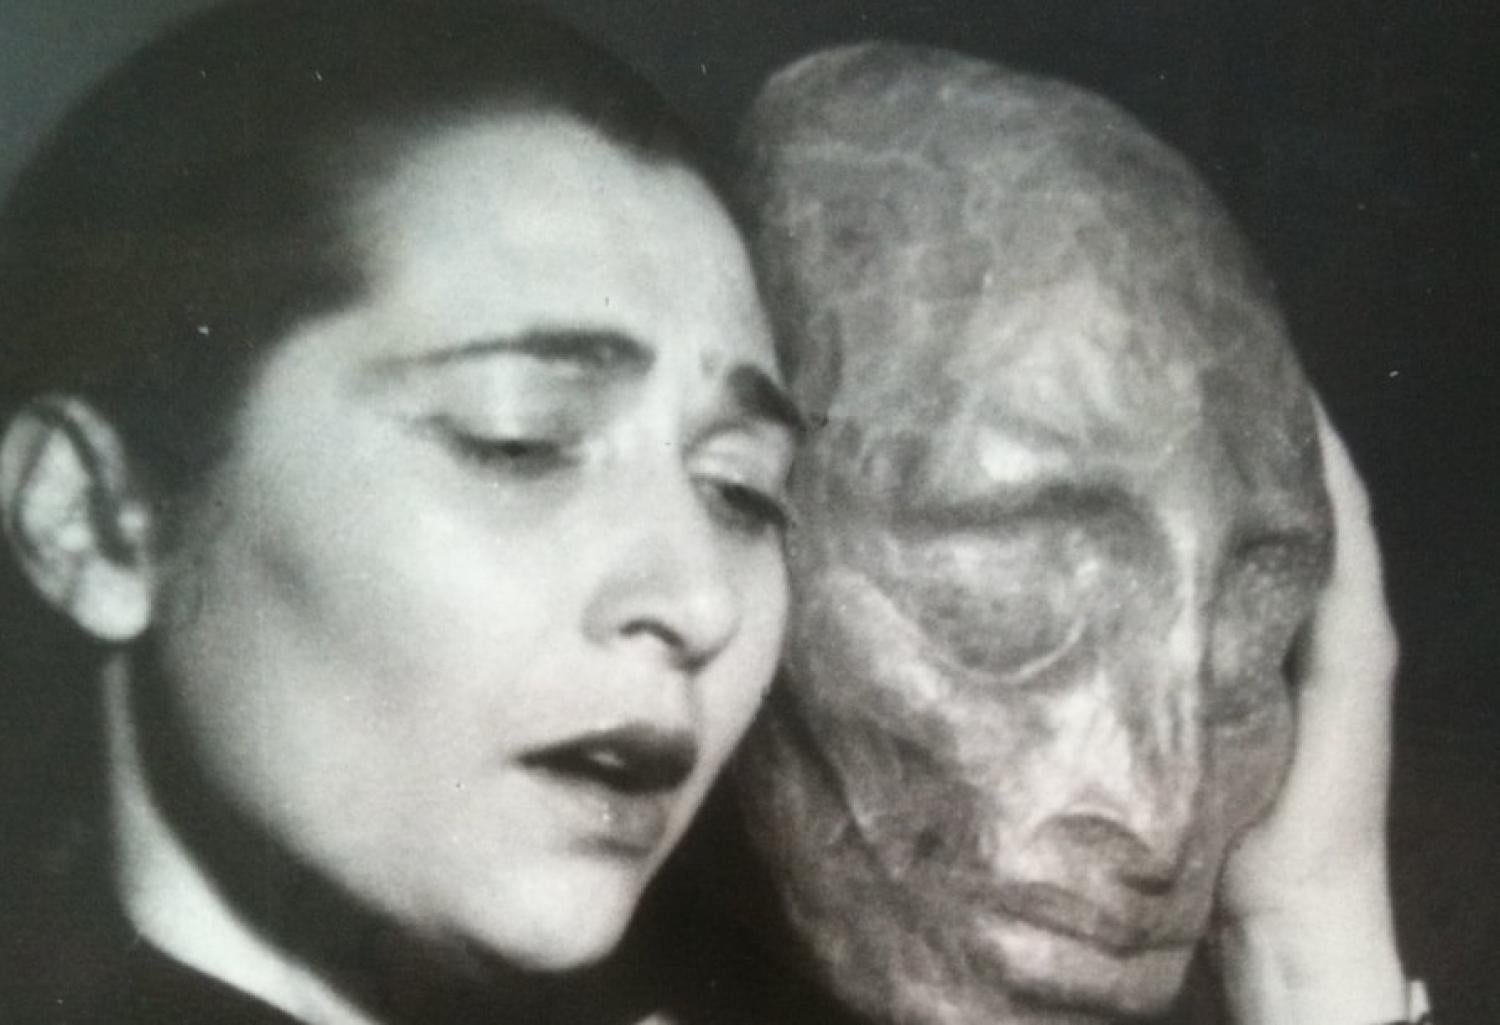 Lin Jaldati performing holding a mask